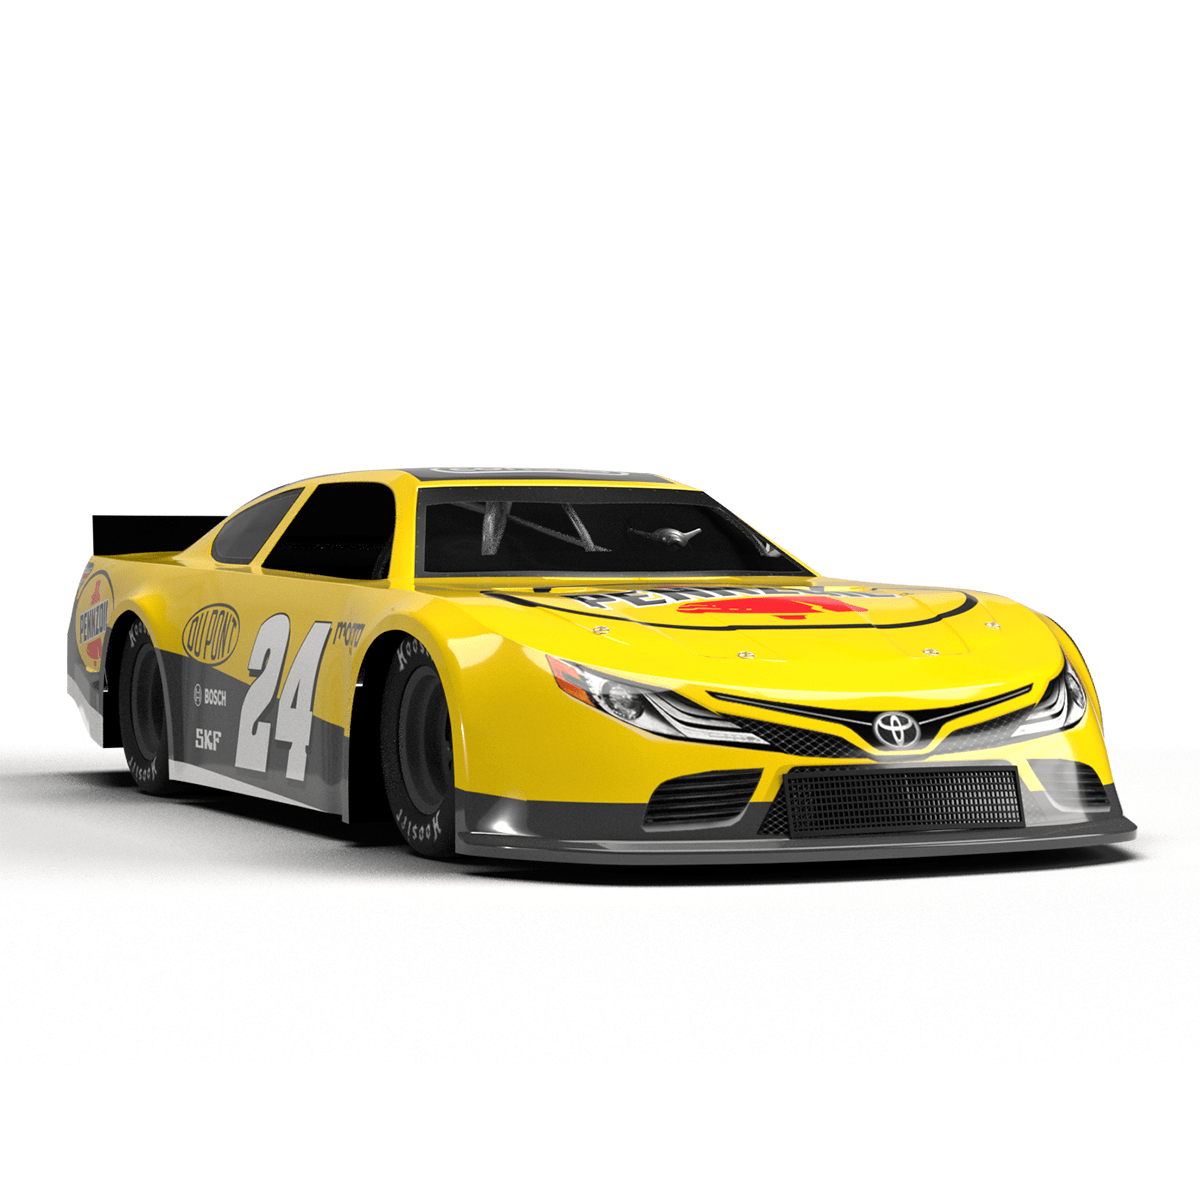 Gen 6 Toyota Camry Super Late Model 3D model livery template